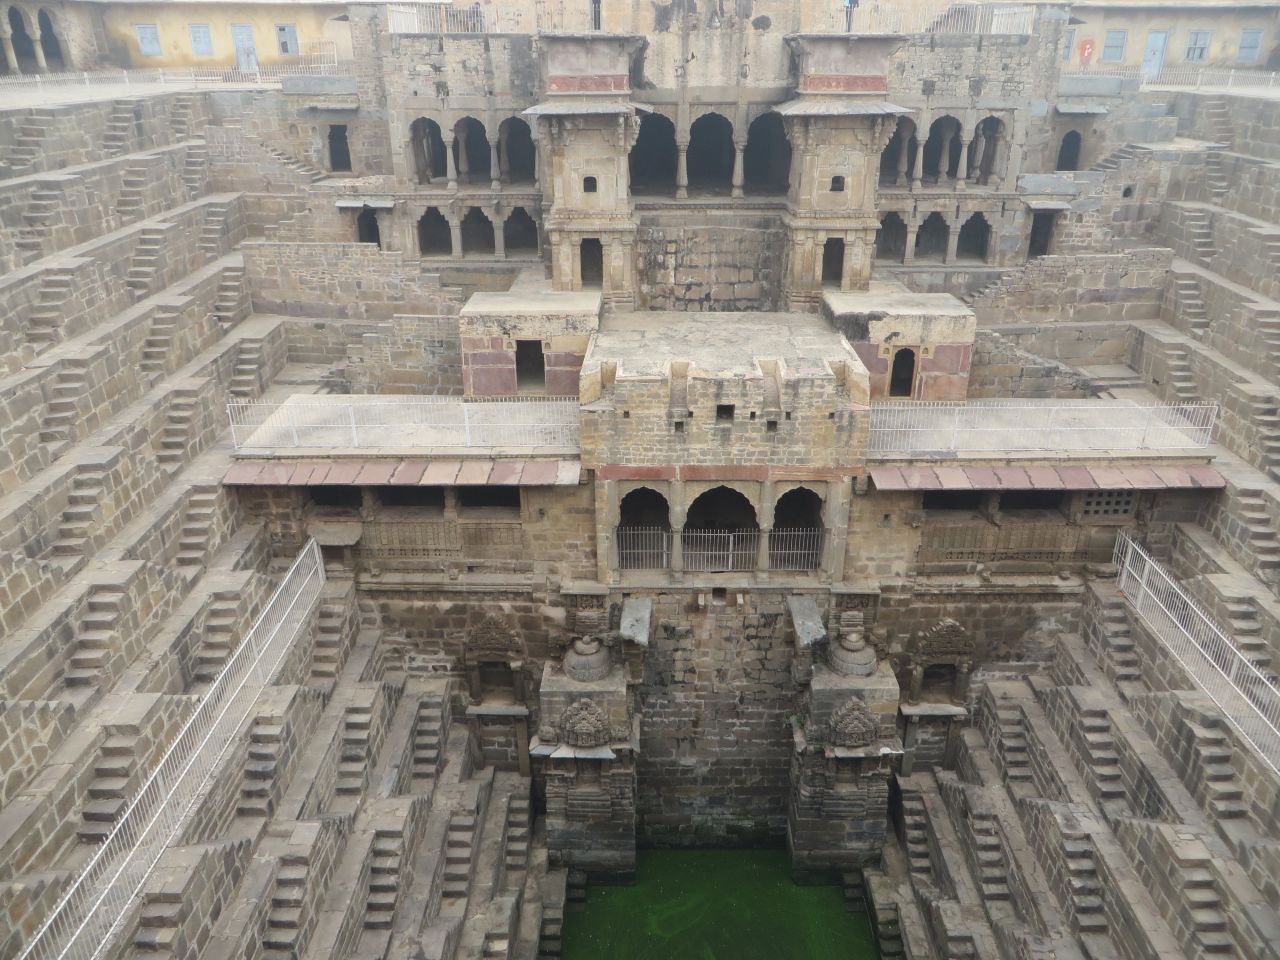 Chand Baori (in Rajasthan) is one of India's more famous stepwells. Lautman has visited over 120 of them. 